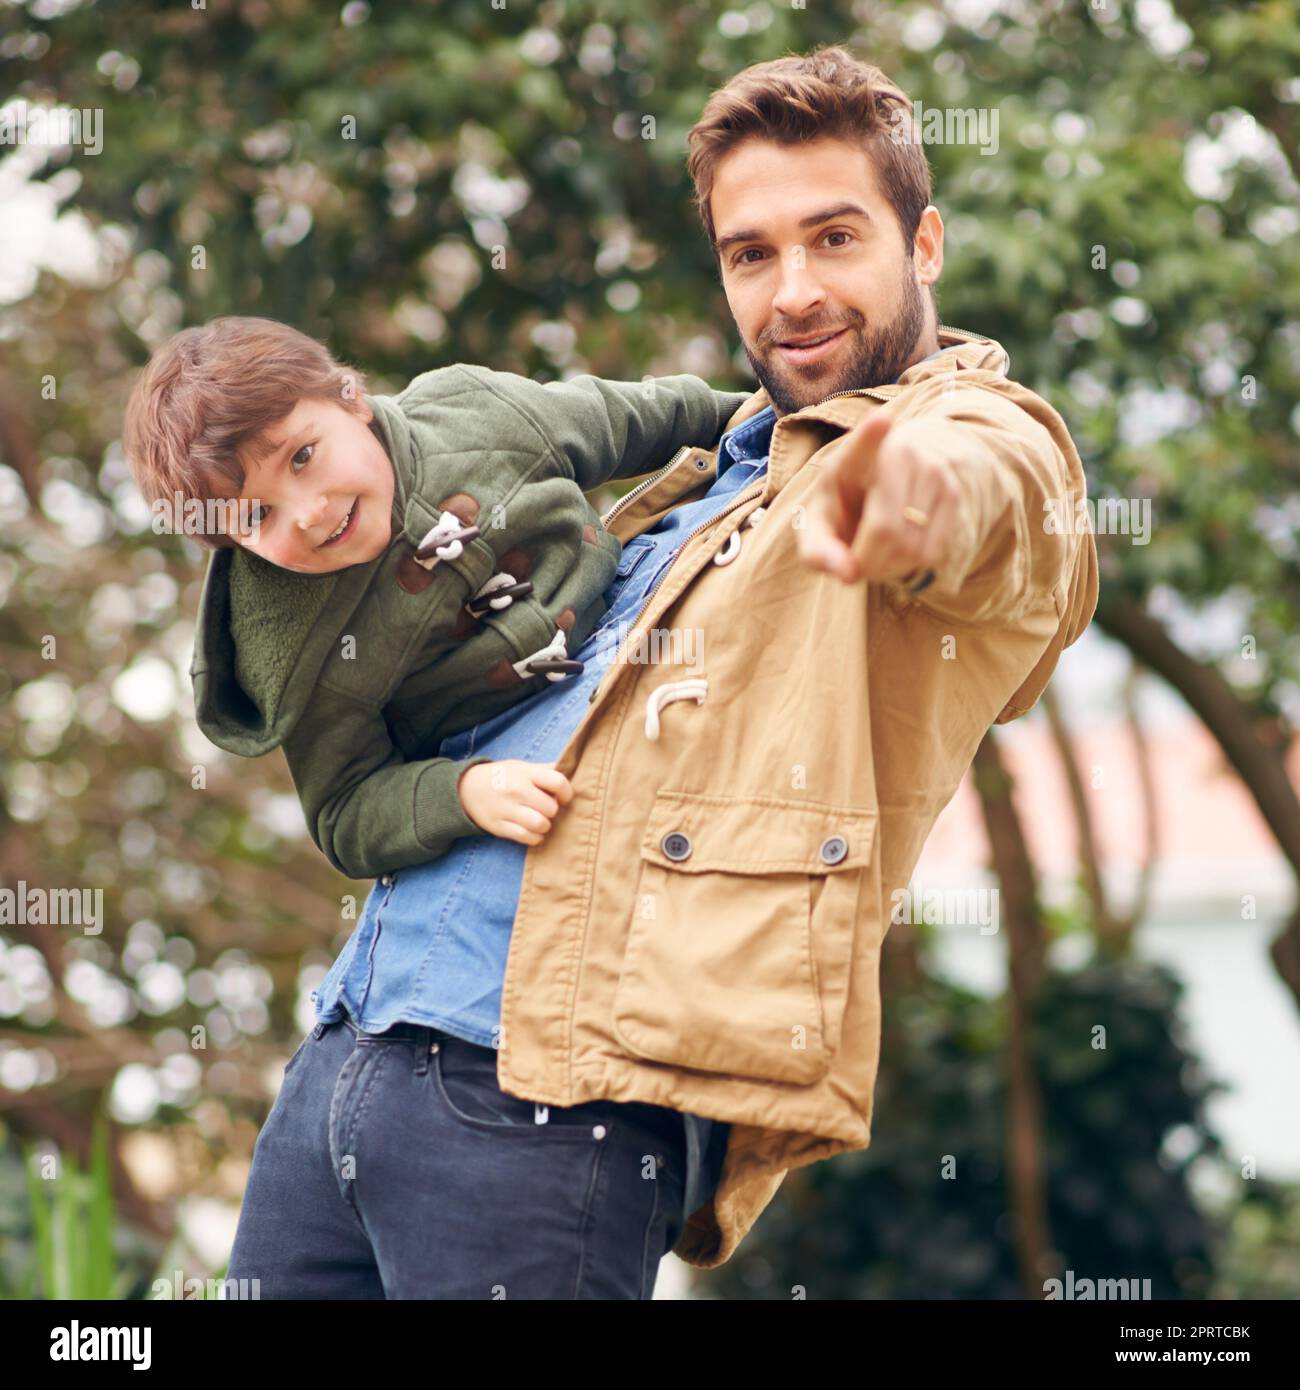 My dad and best friend. a father and son enjoying a day outdoors. Stock Photo